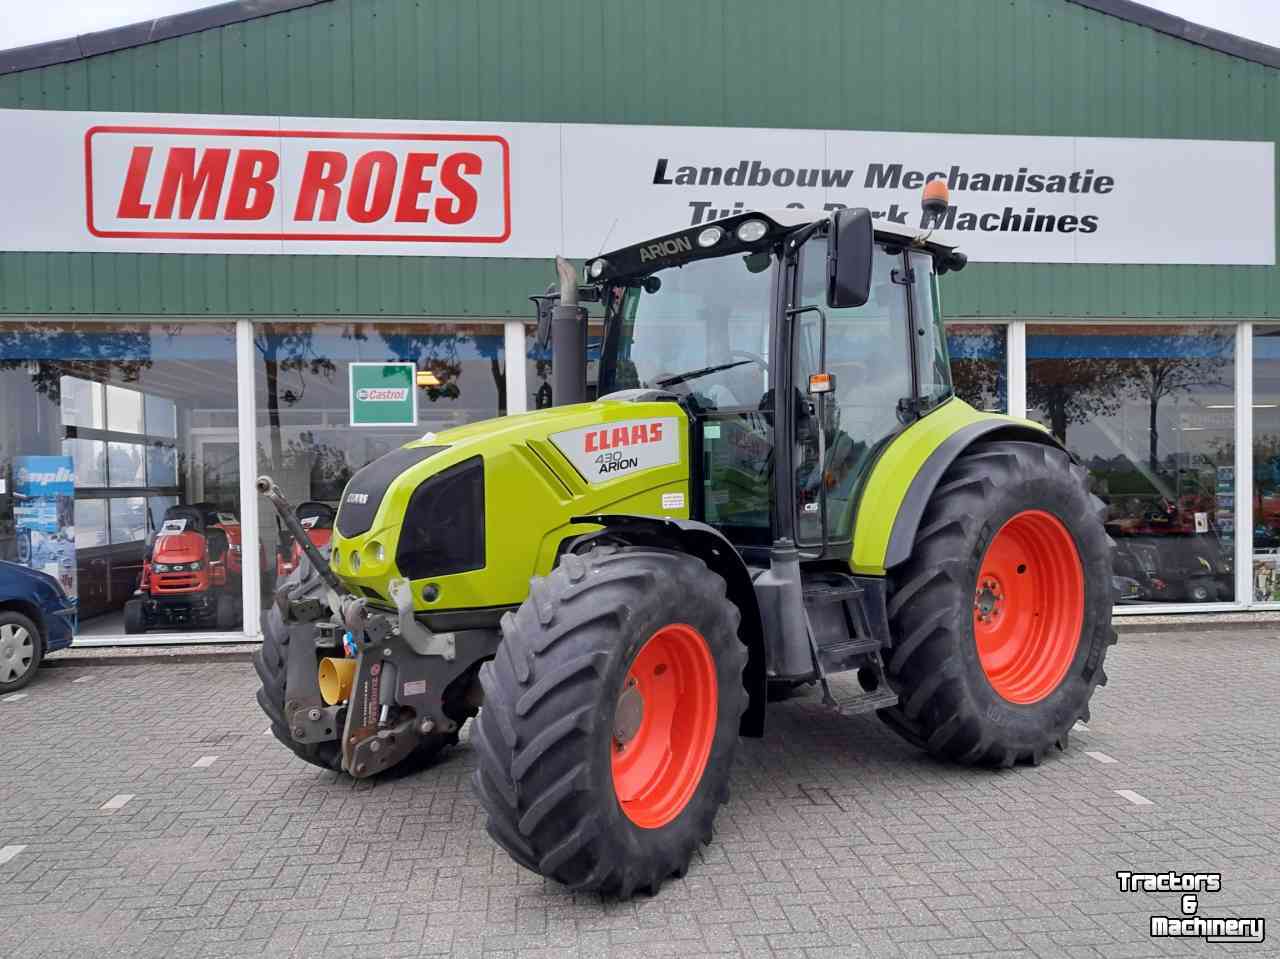 Claas Arion 430 cis